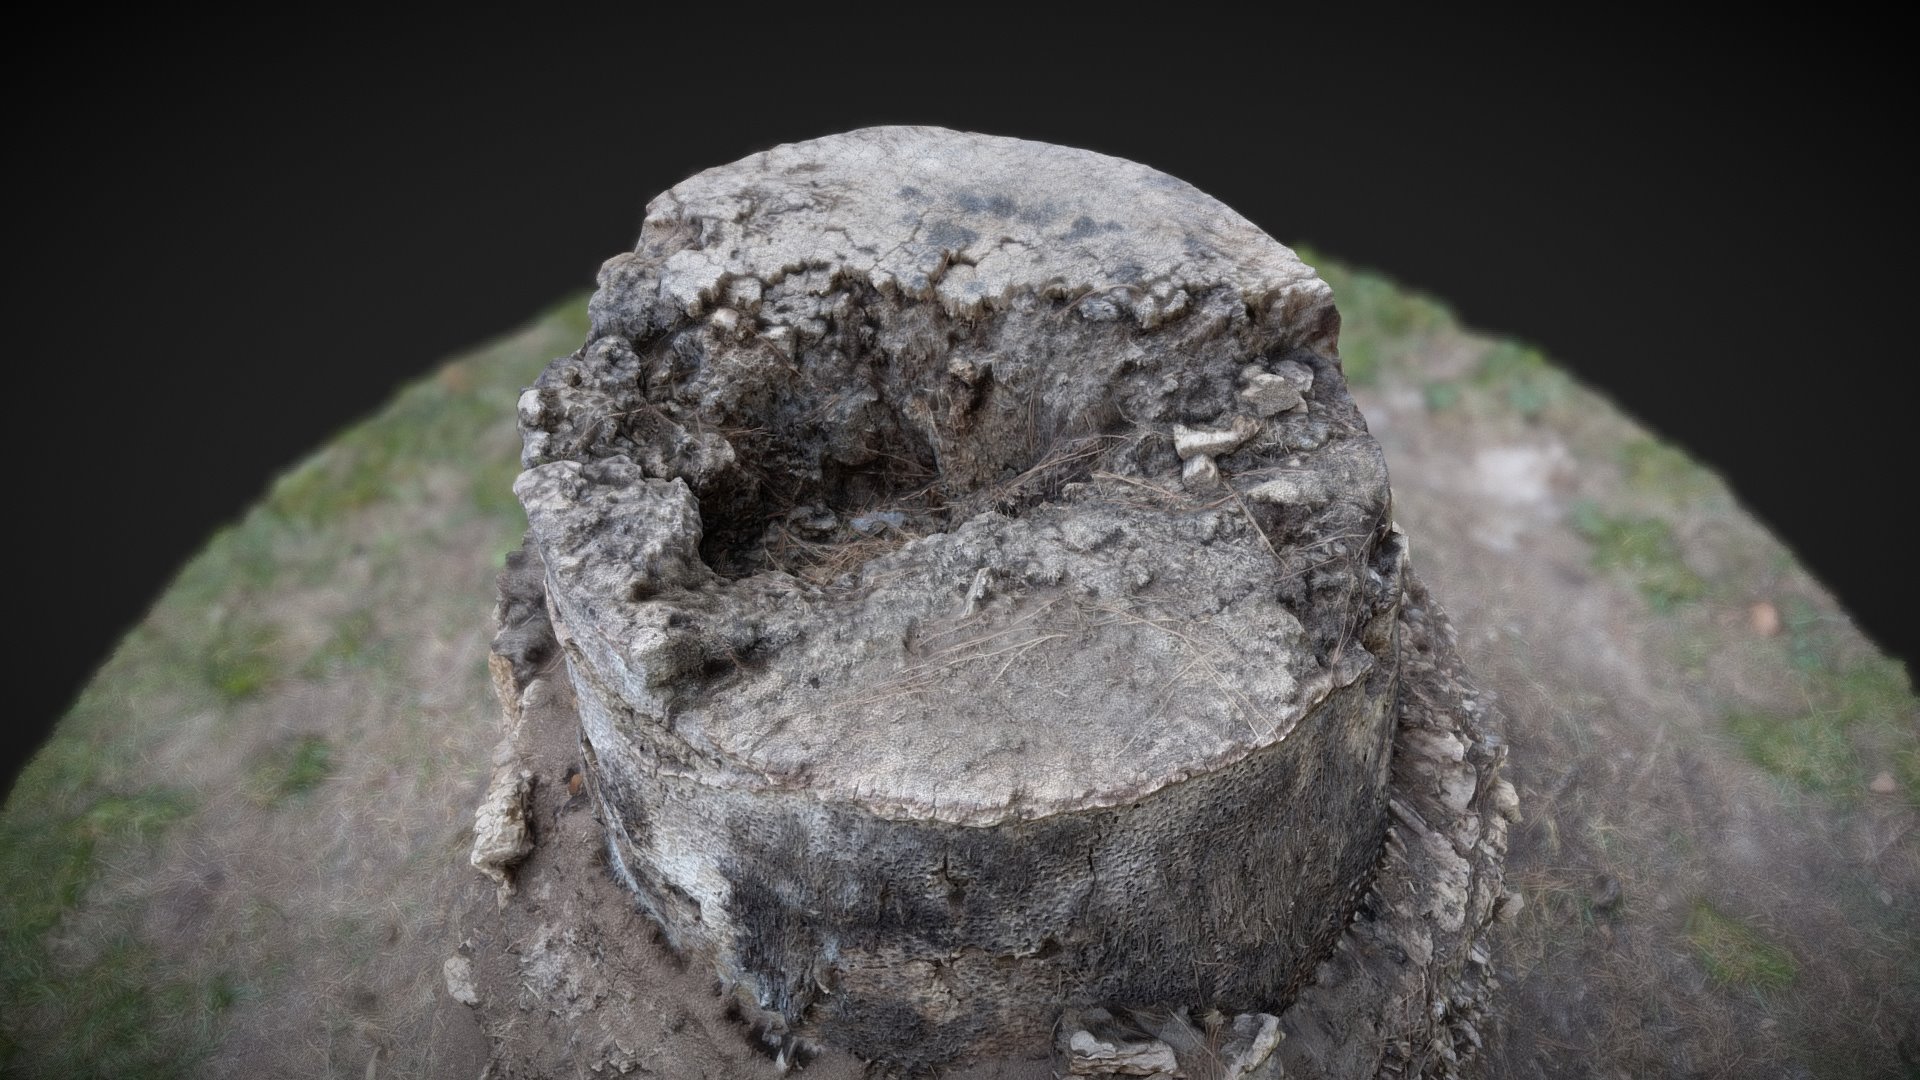 3D model Palm Tree Stump #1 - This is a 3D model of the Palm Tree Stump #1. The 3D model is about a rock with a face carved into it.